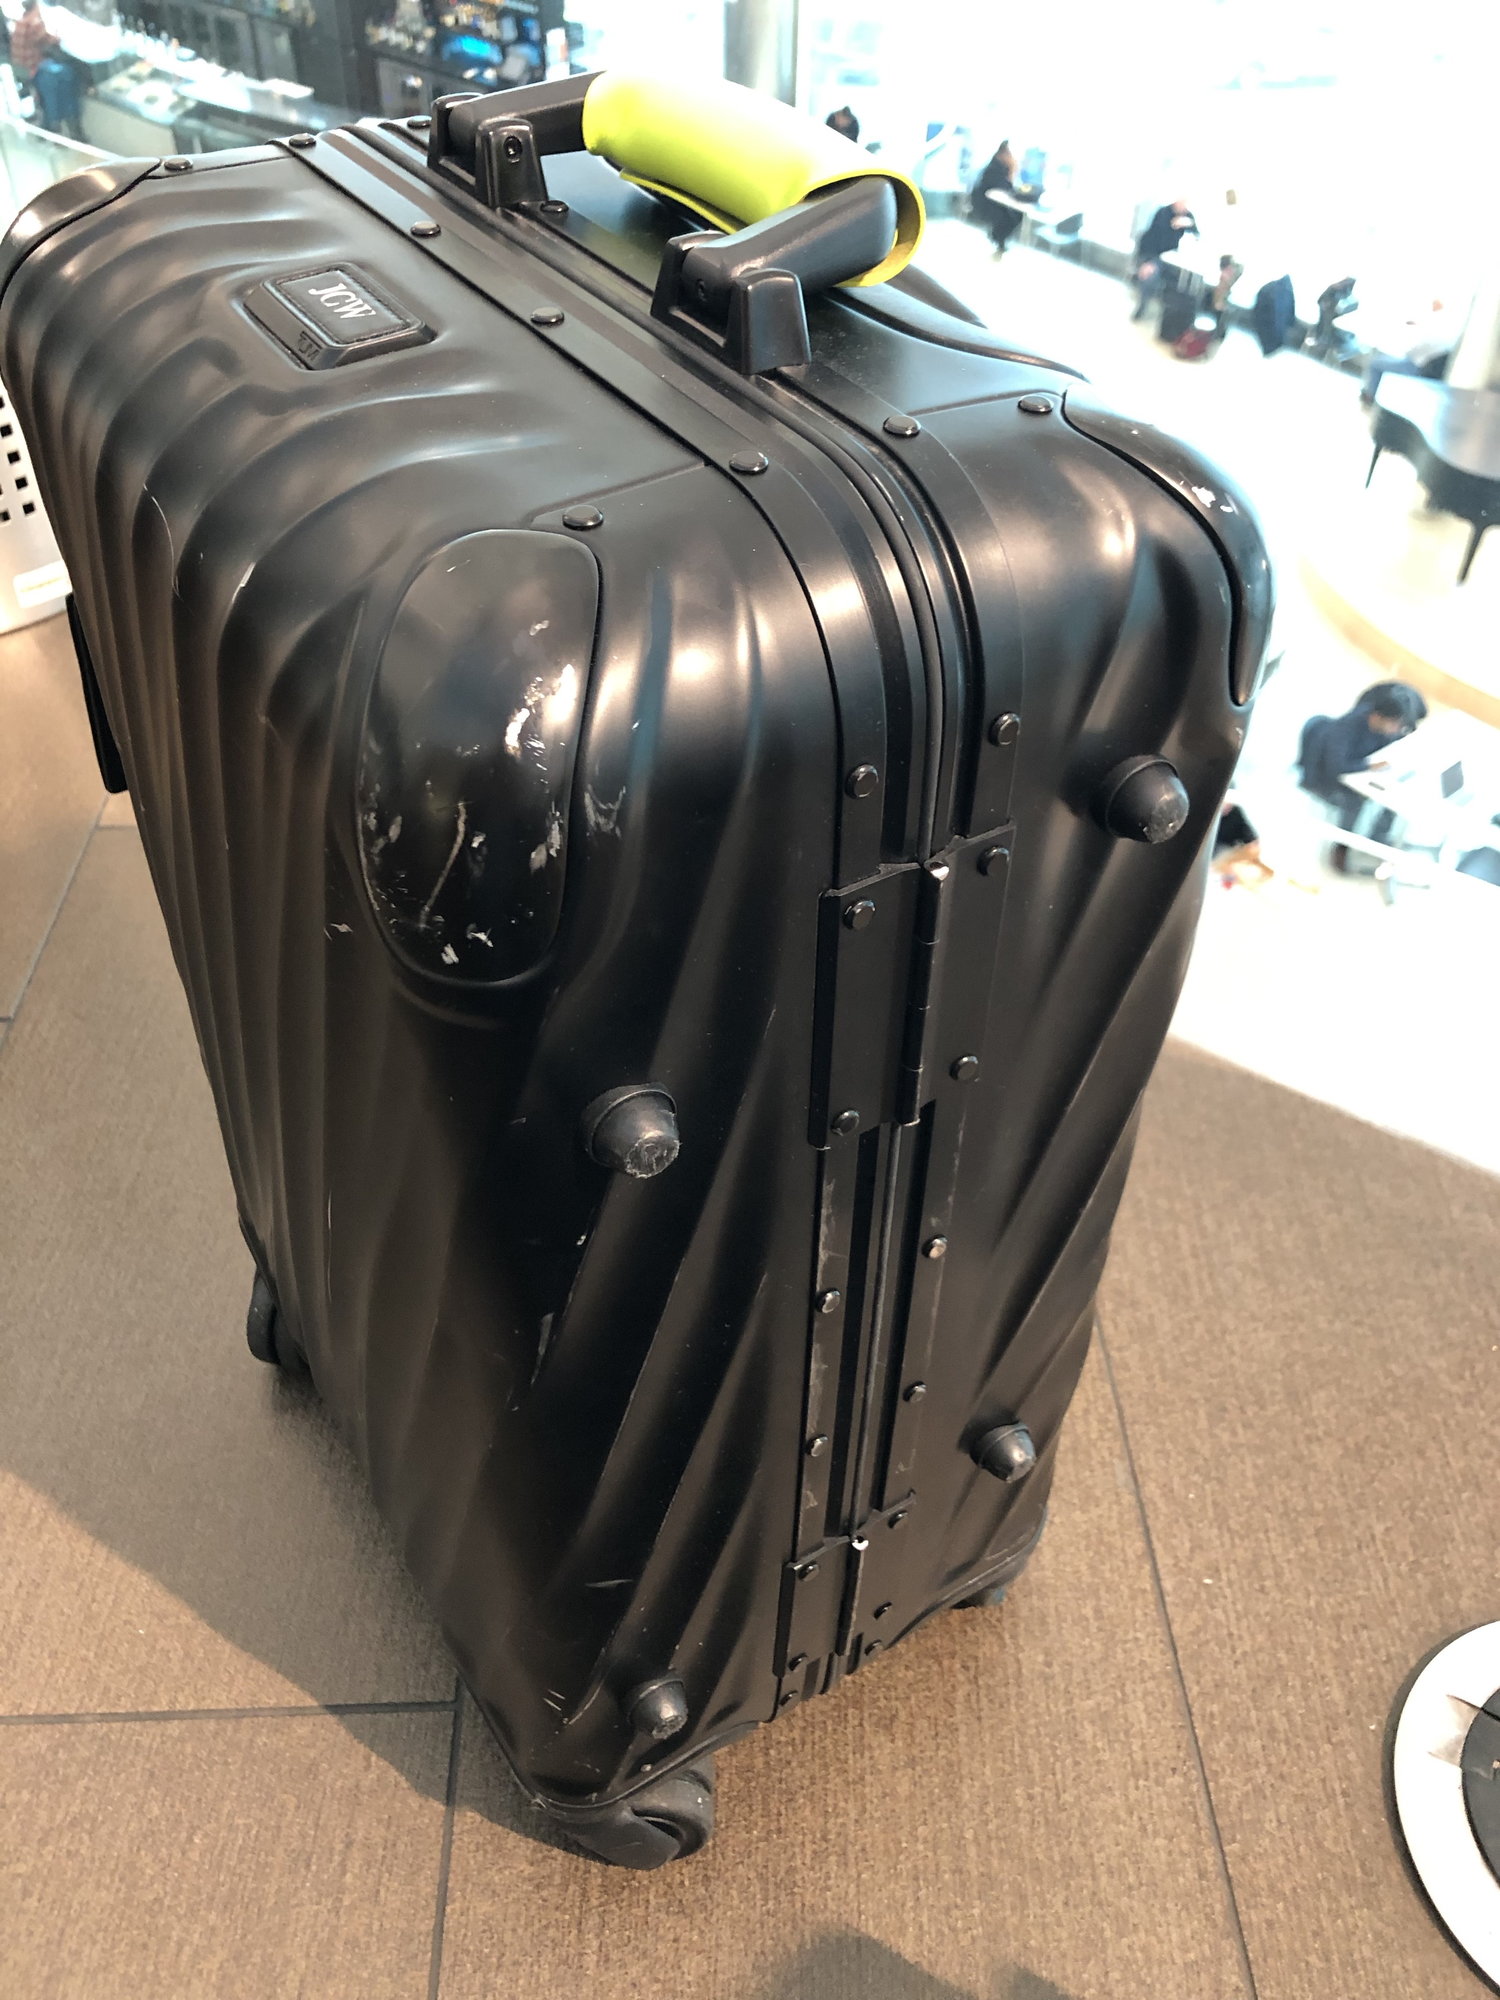 Delta smashed my expensive Tumi luggage, responds don't worry